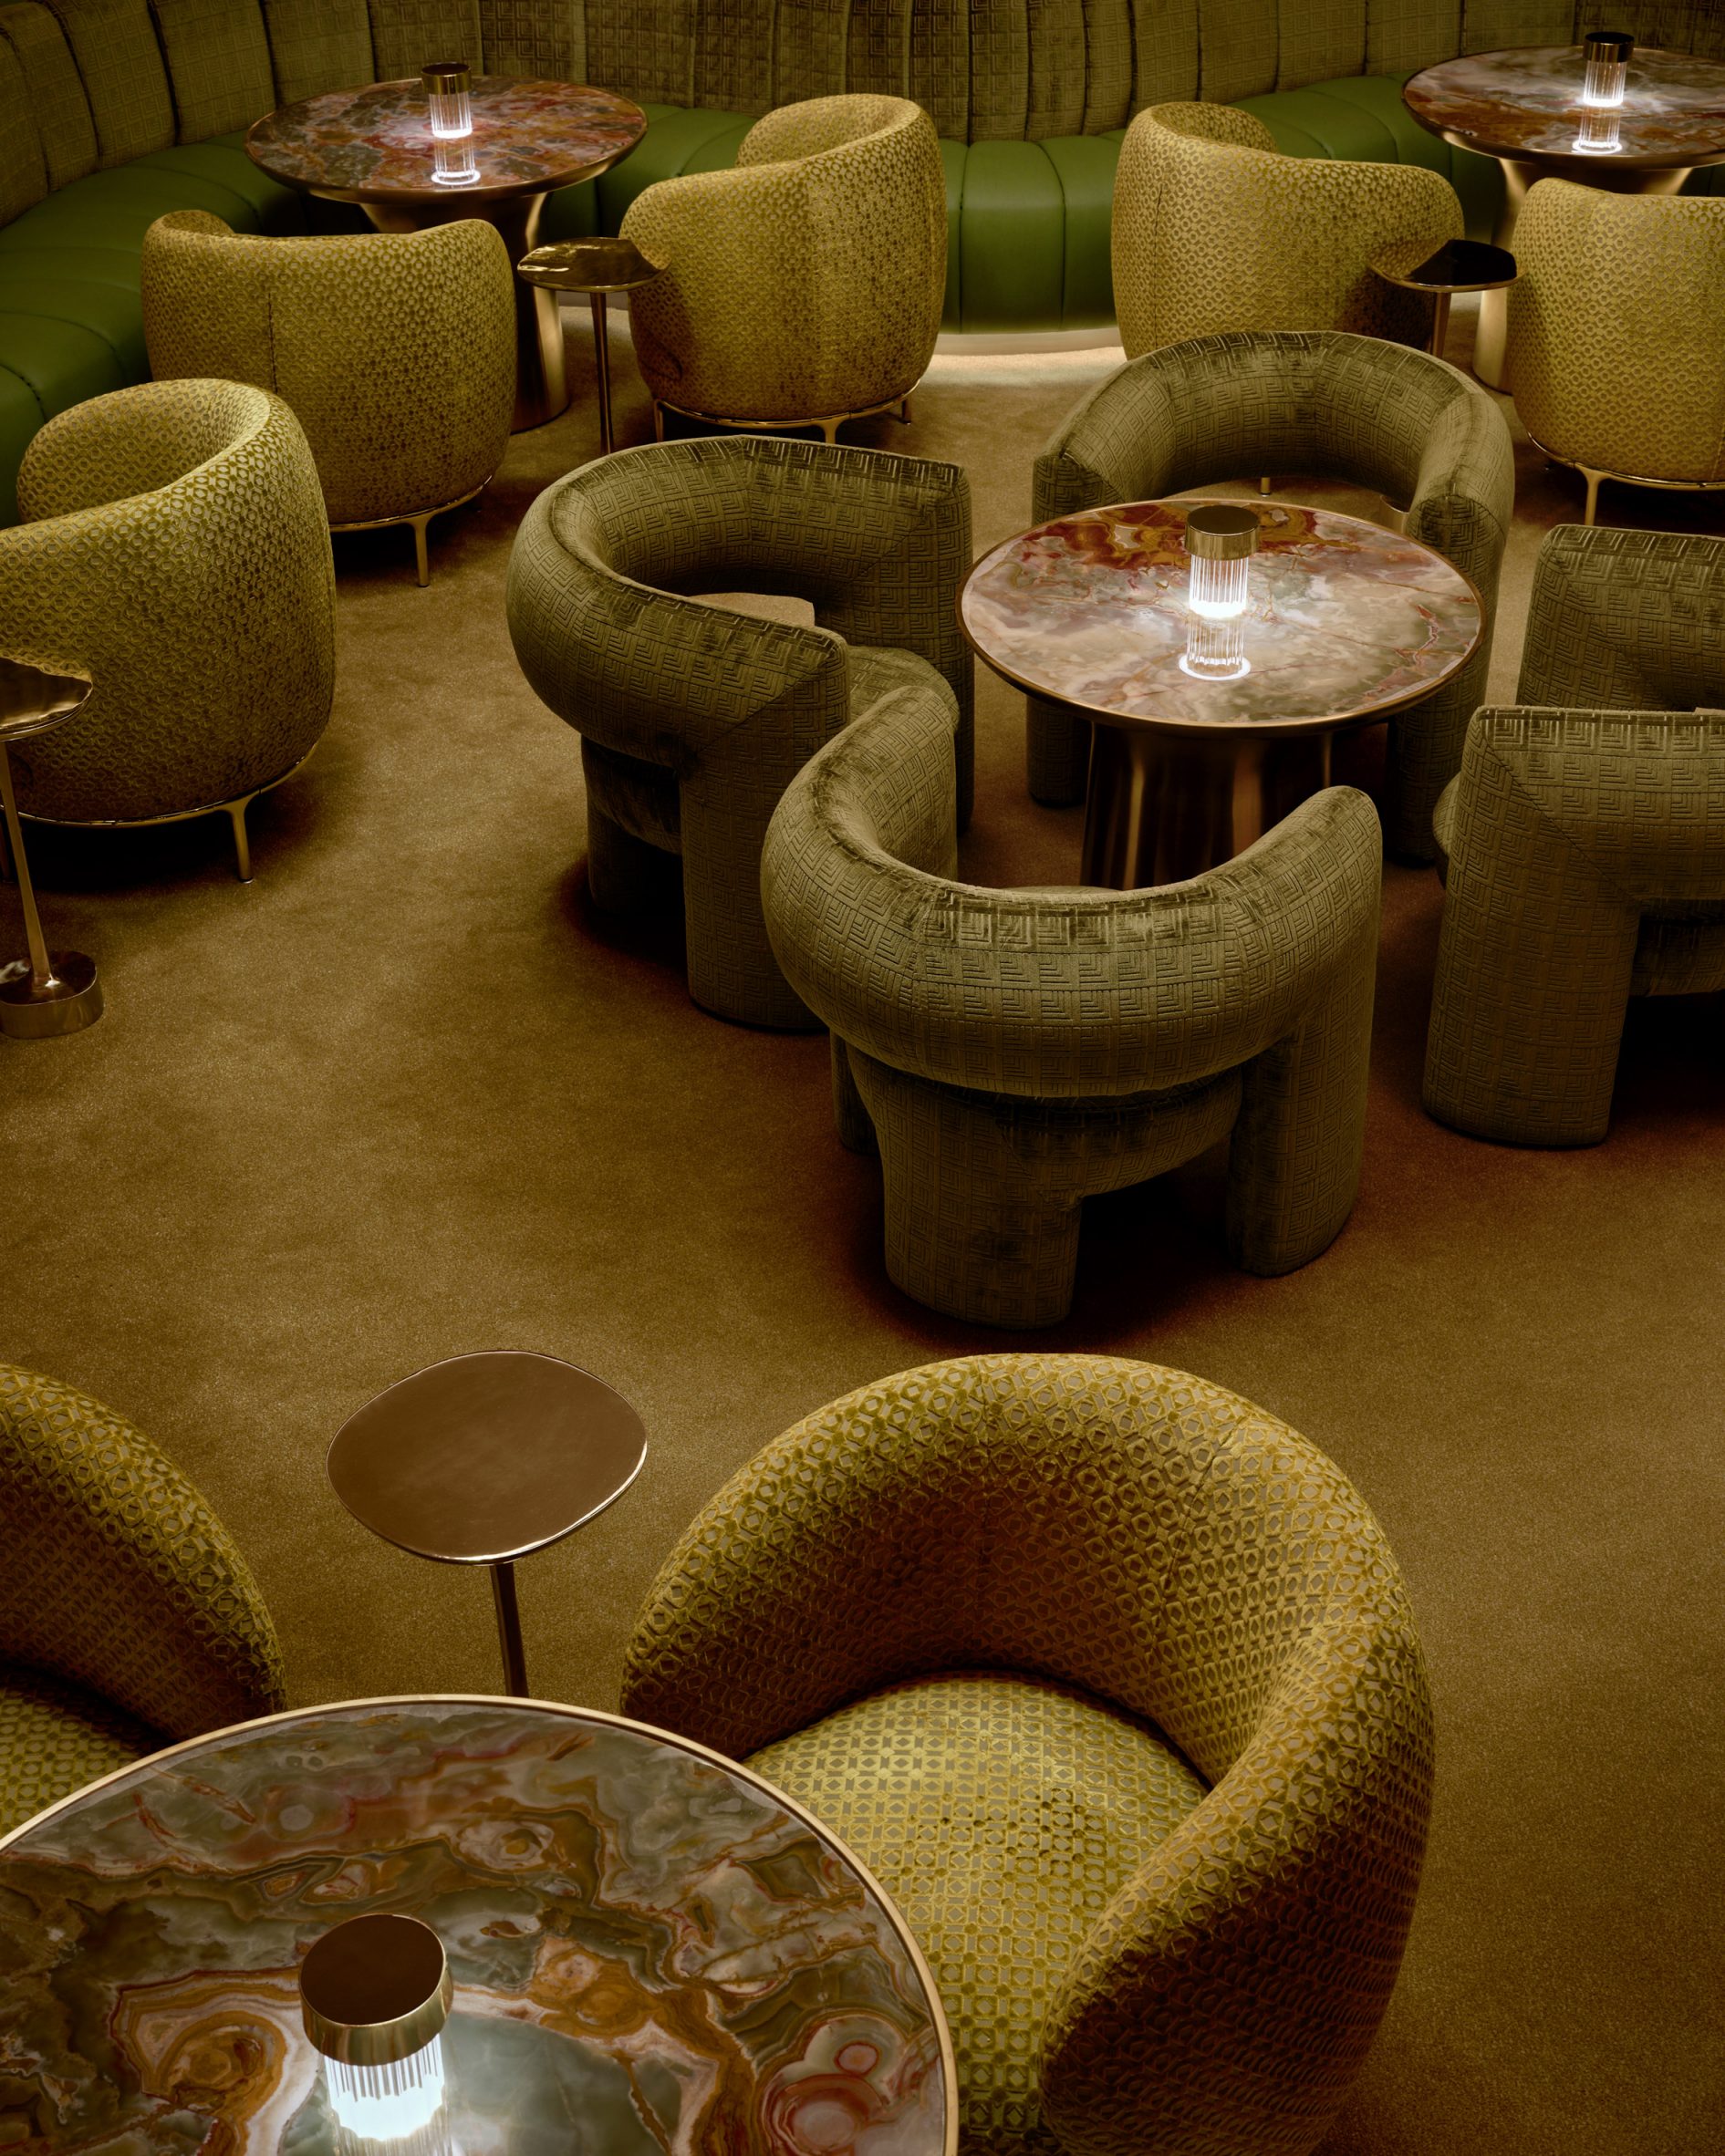 Conversation pit with carpet, chairs and banquettes in various shades of green